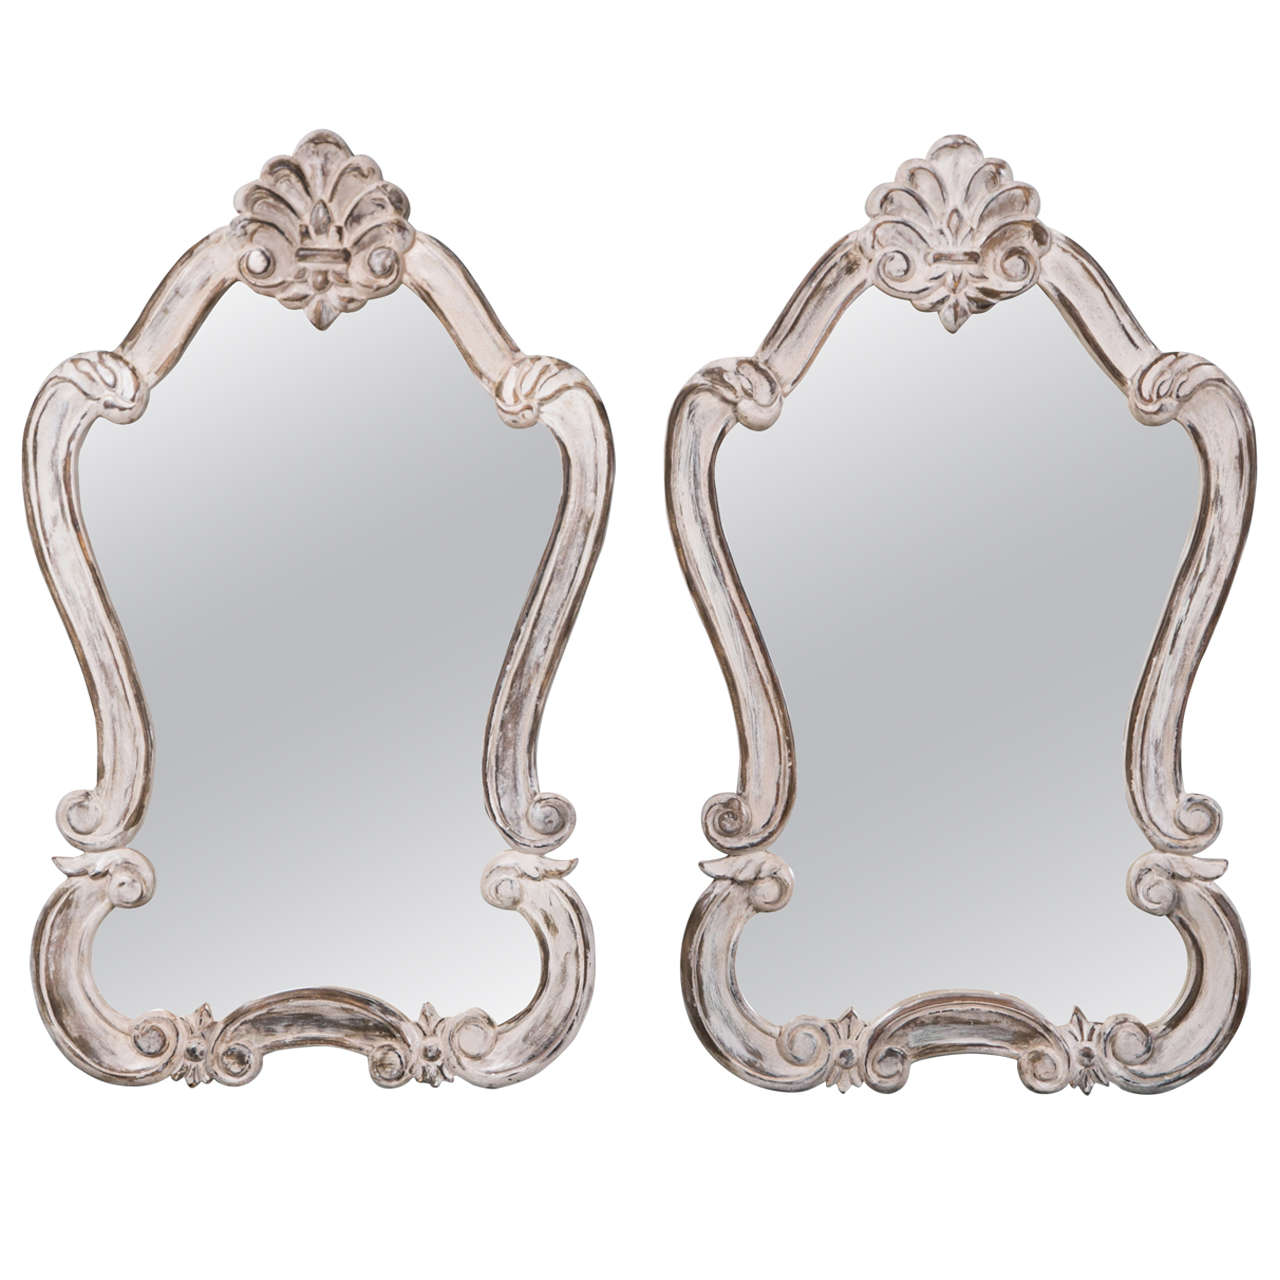 Pair of Rococo Style Distress Painted Mirrors